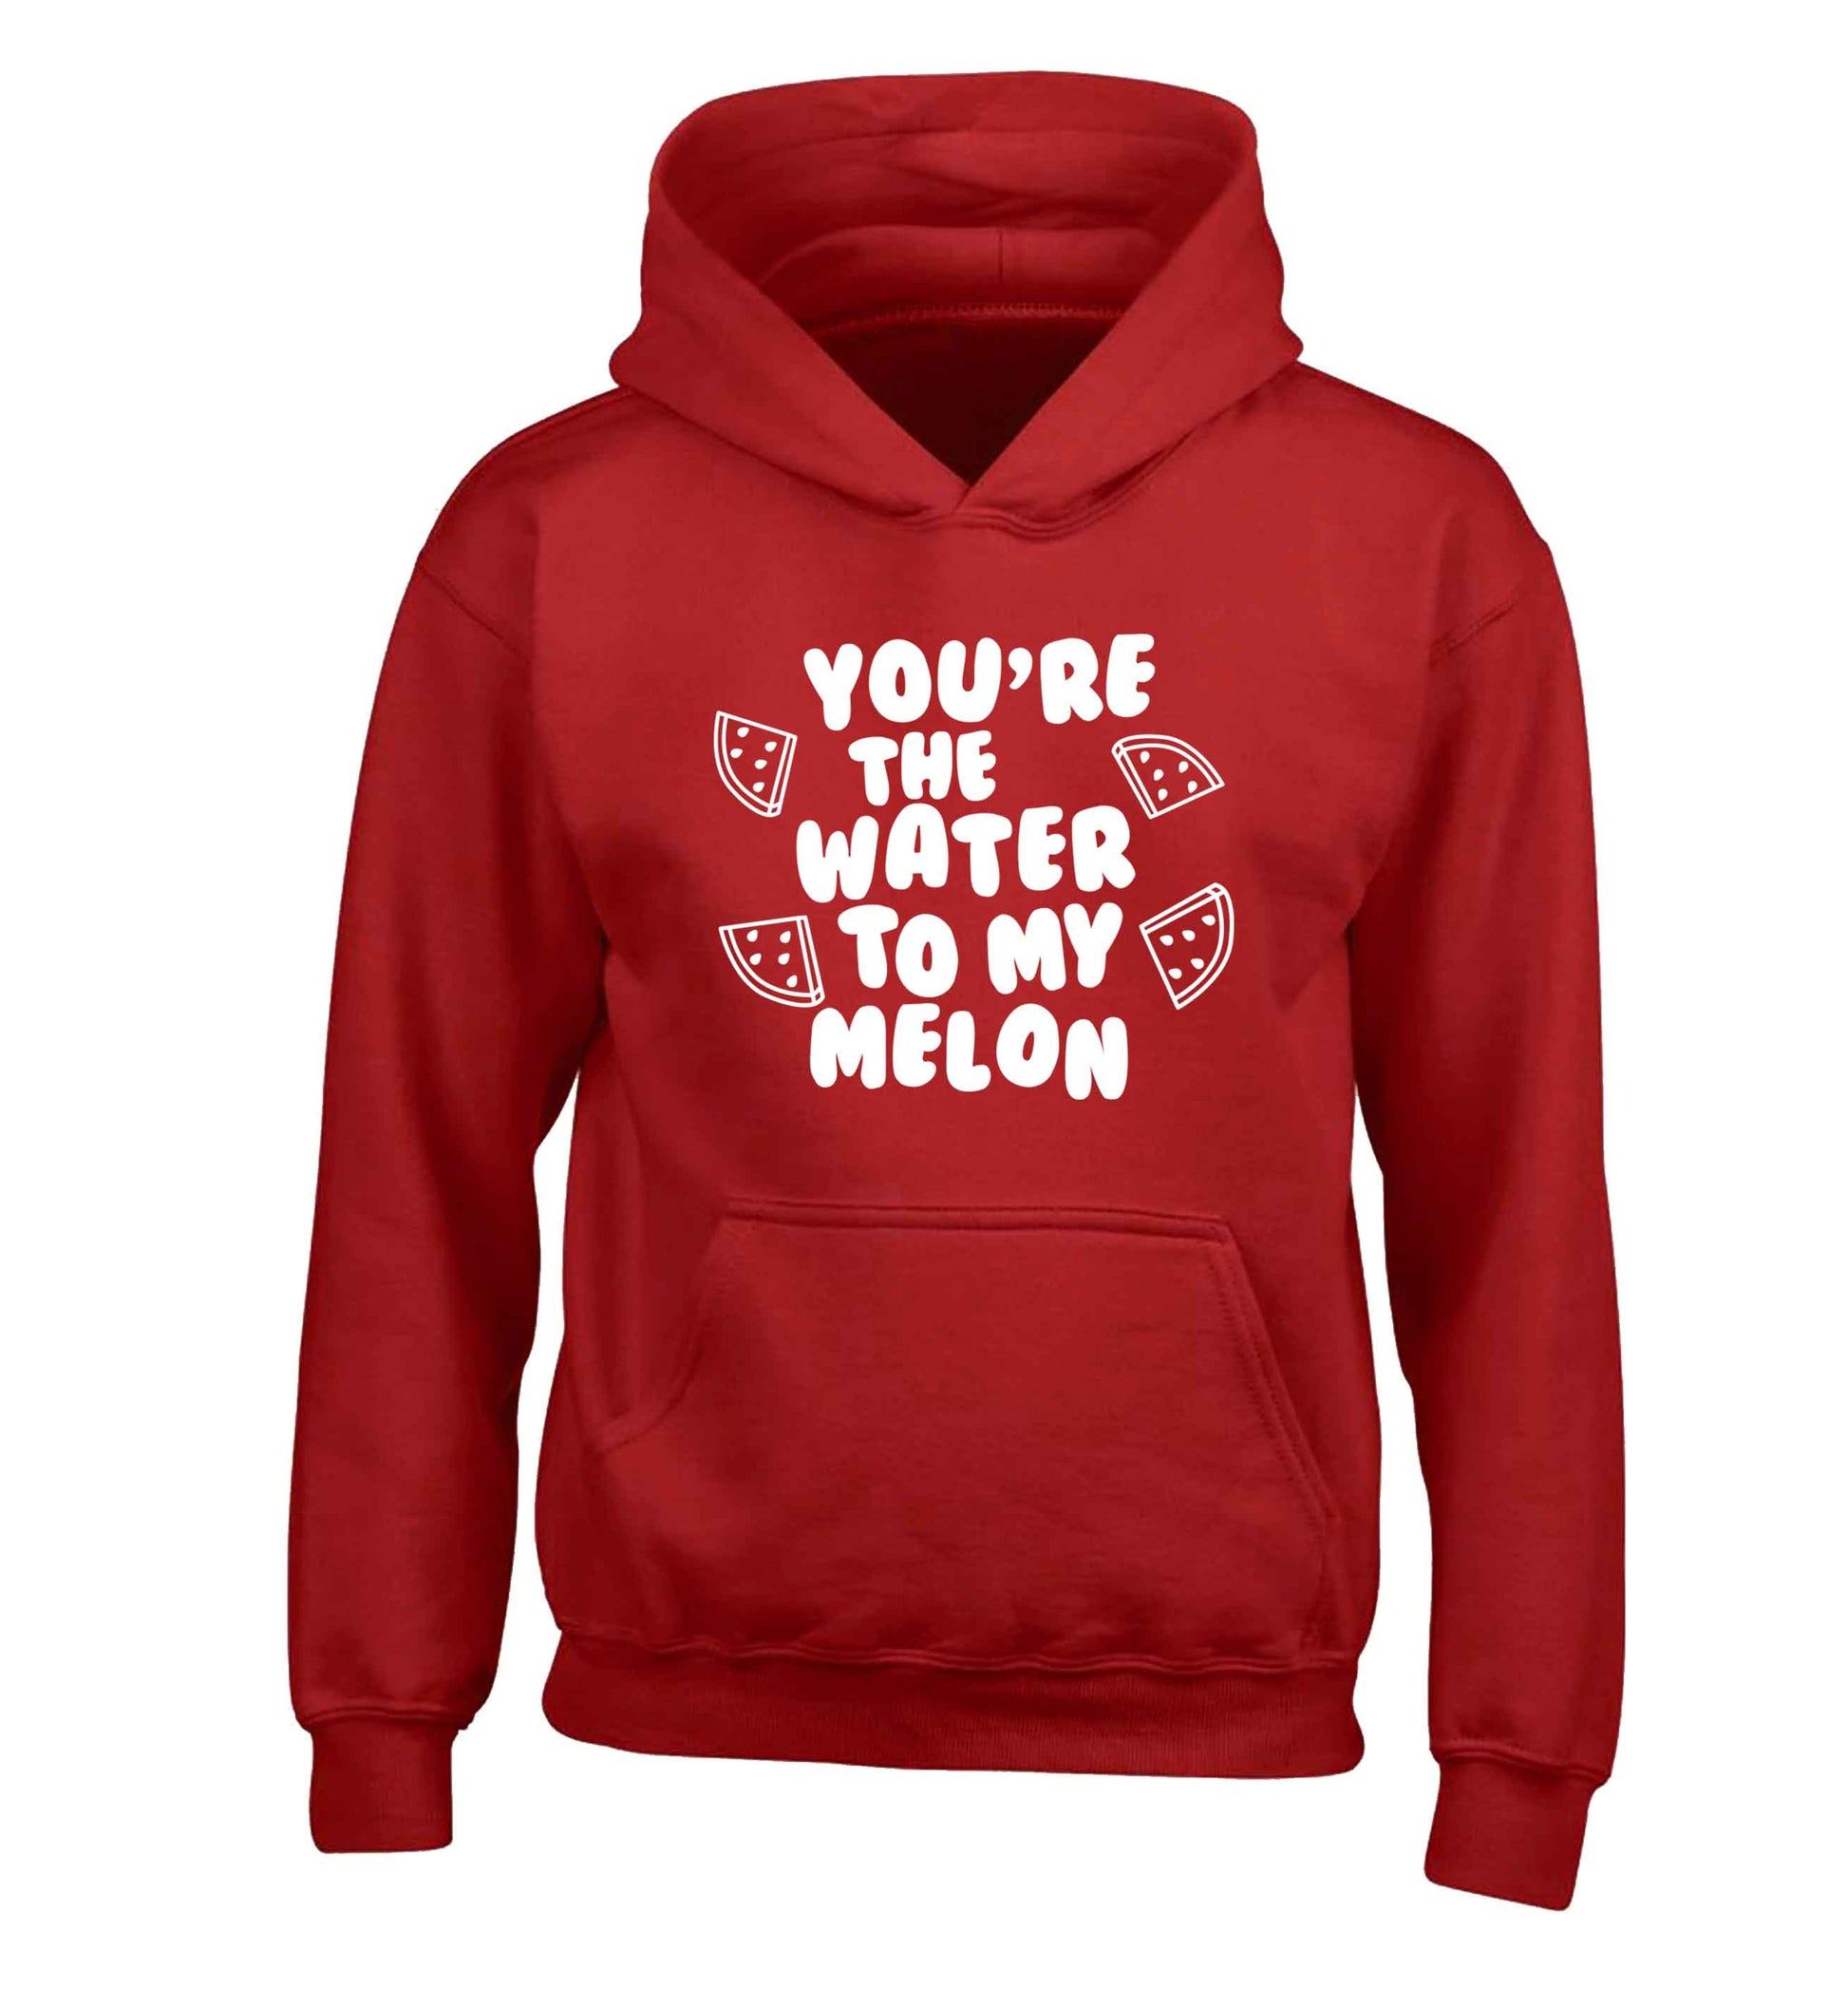 You're the water to my melon children's red hoodie 12-13 Years